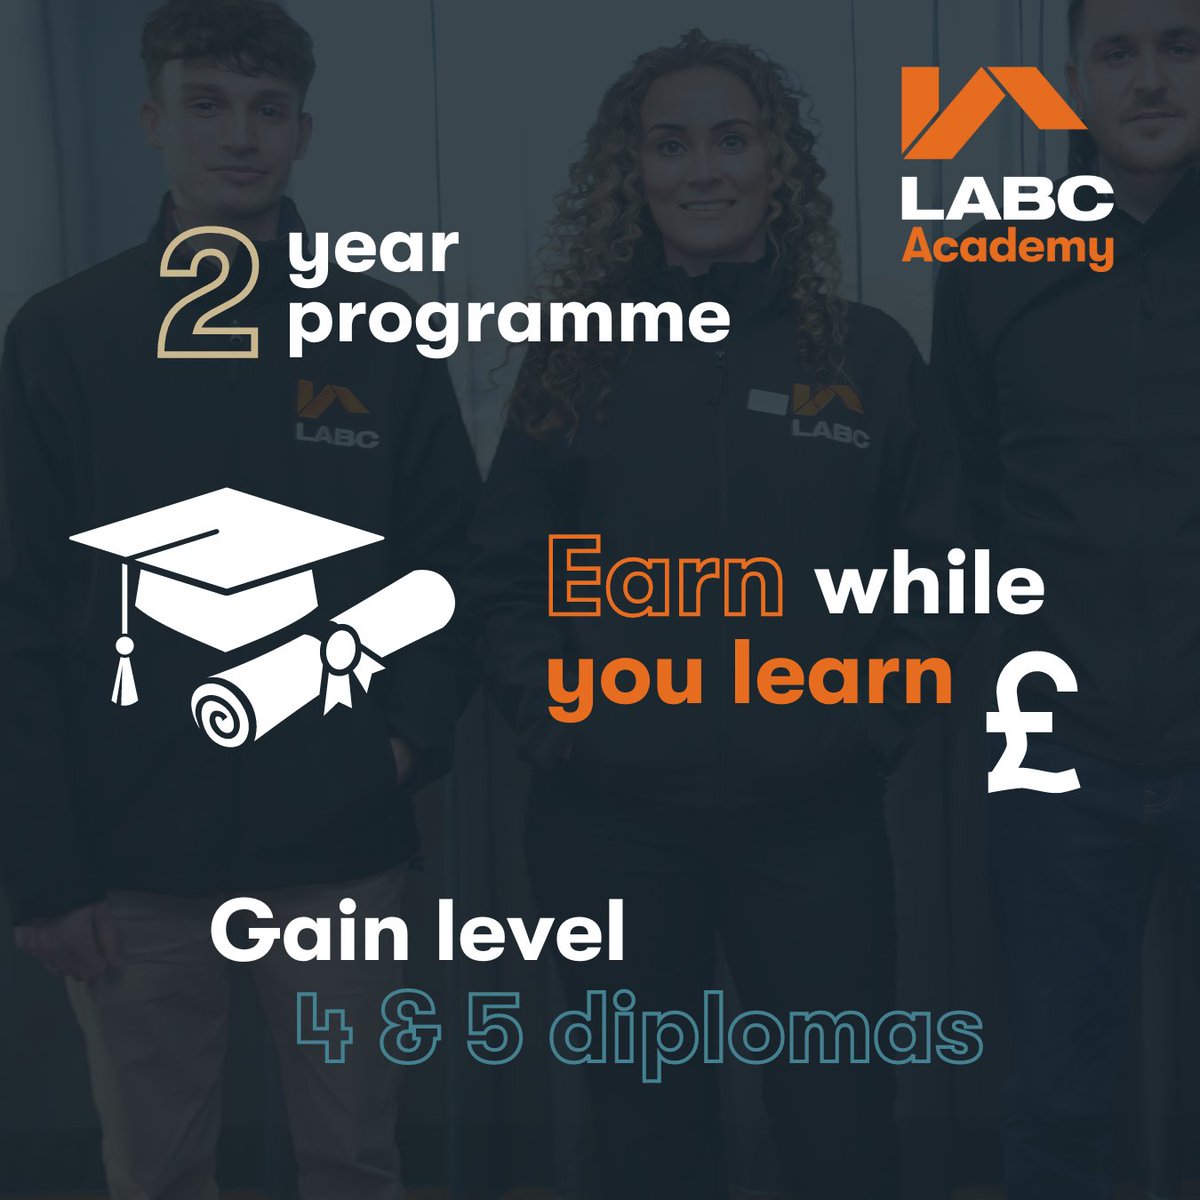 Just over a week until the LABC Academy assessment centres! Are you interested in a career with real progression opportunities where you can make a difference to your community? Then maybe a career in local authority building control could be for you: labc.co.uk/labc-academy